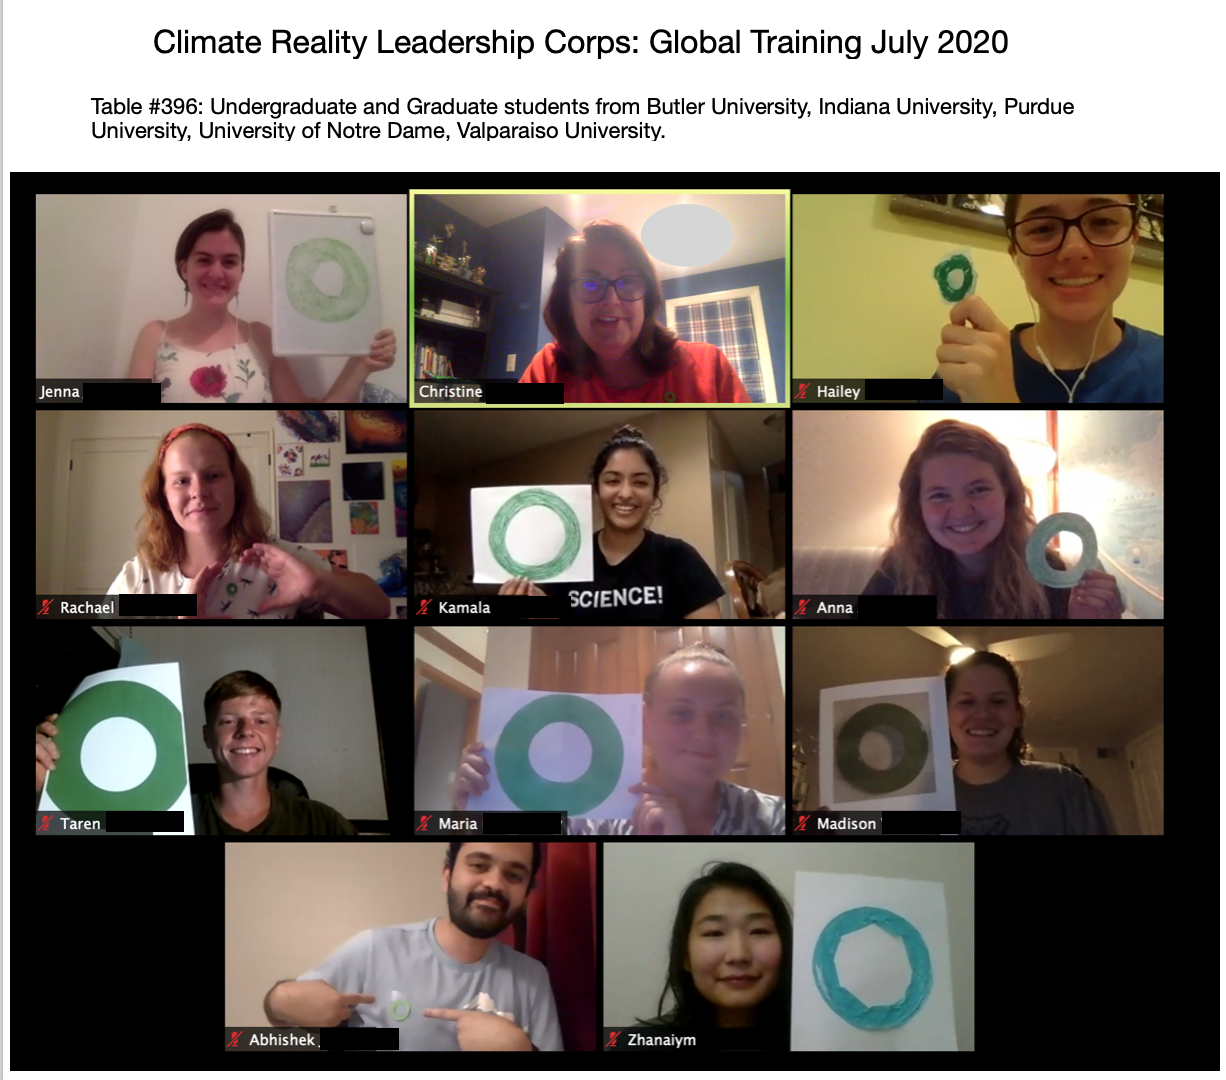 Image of virtual training participants with homemade green rings to symbolize their certification. 